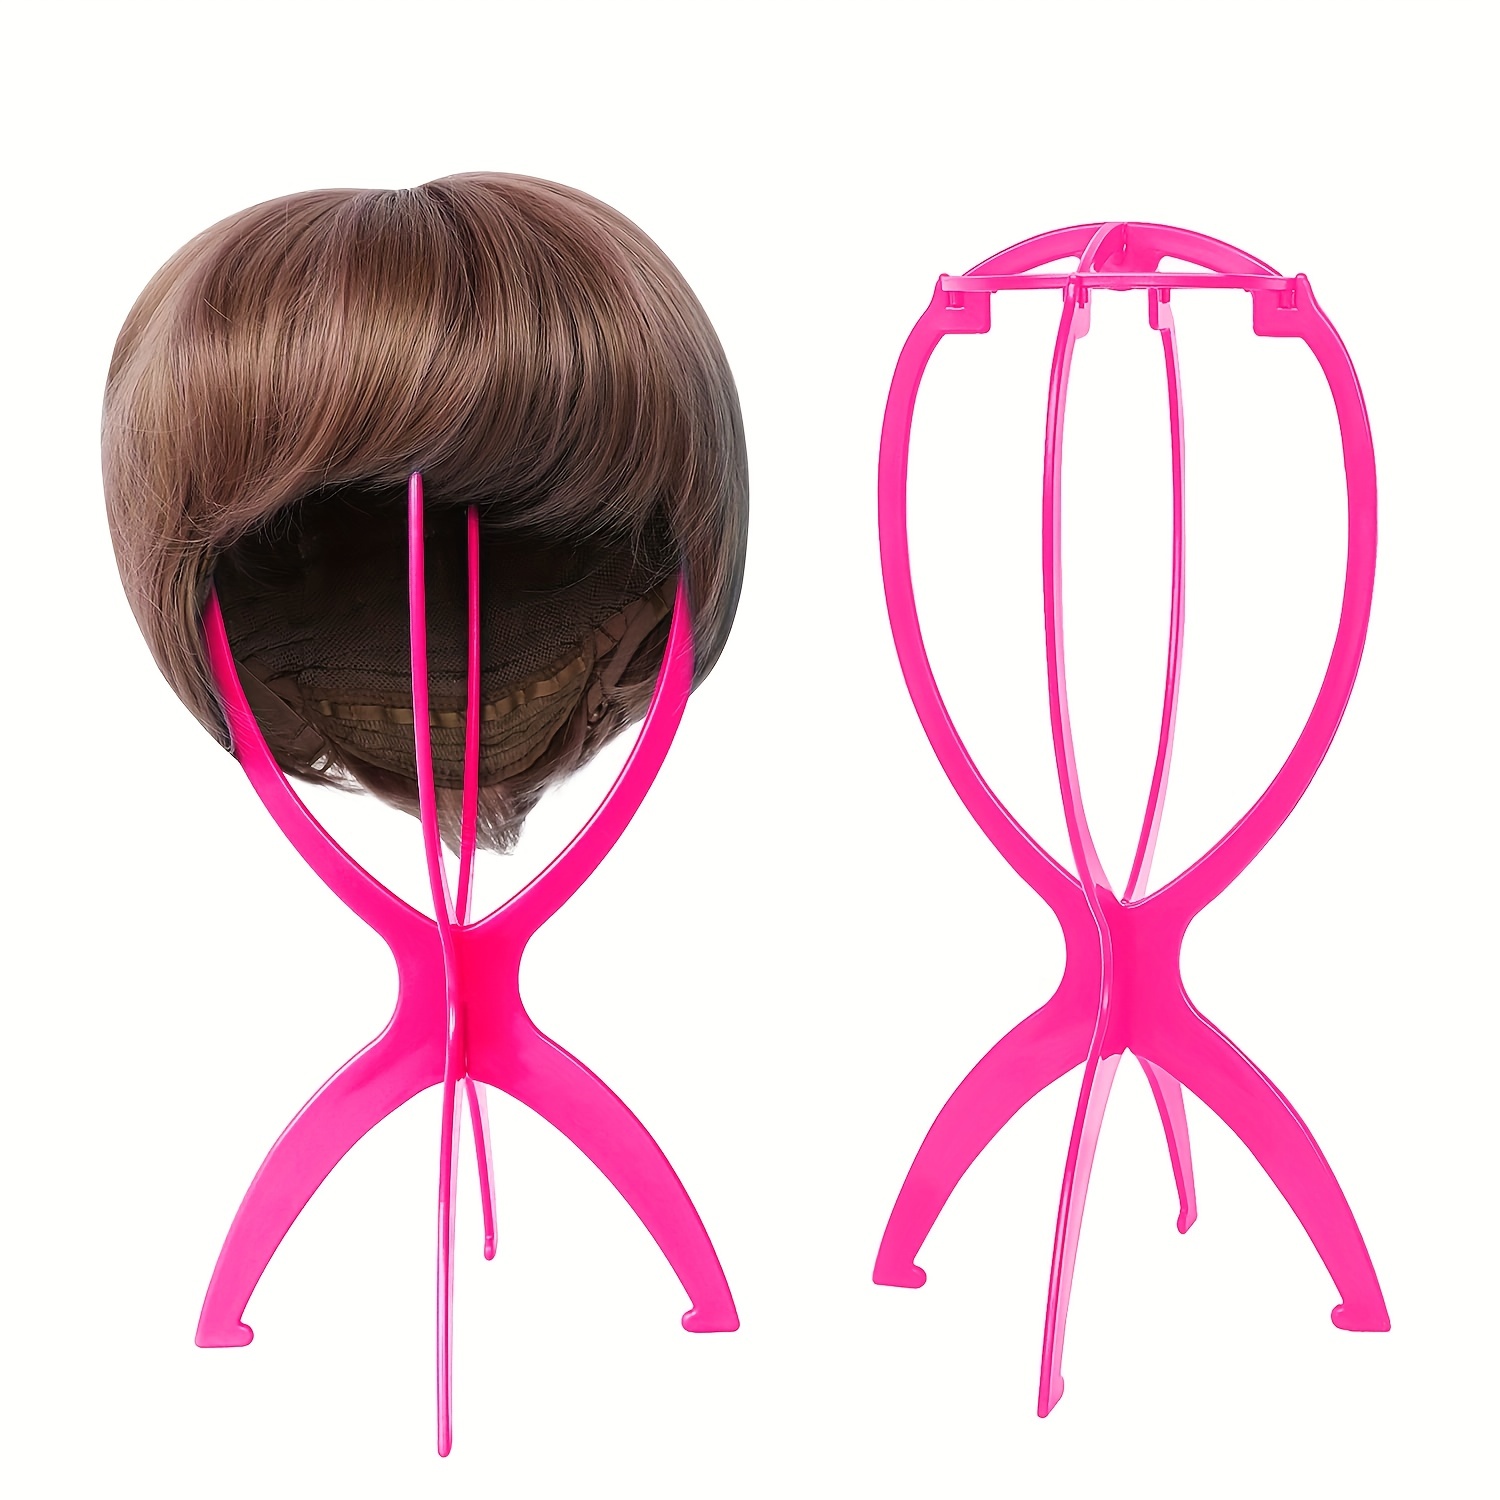 Wig Stand 1PC Adjustable Height Portable Wig Holder Stands Non-Slip Wig  Head Holders Durable Plastic Wig Head Stand for Multiple Wigs and Hats  Styling